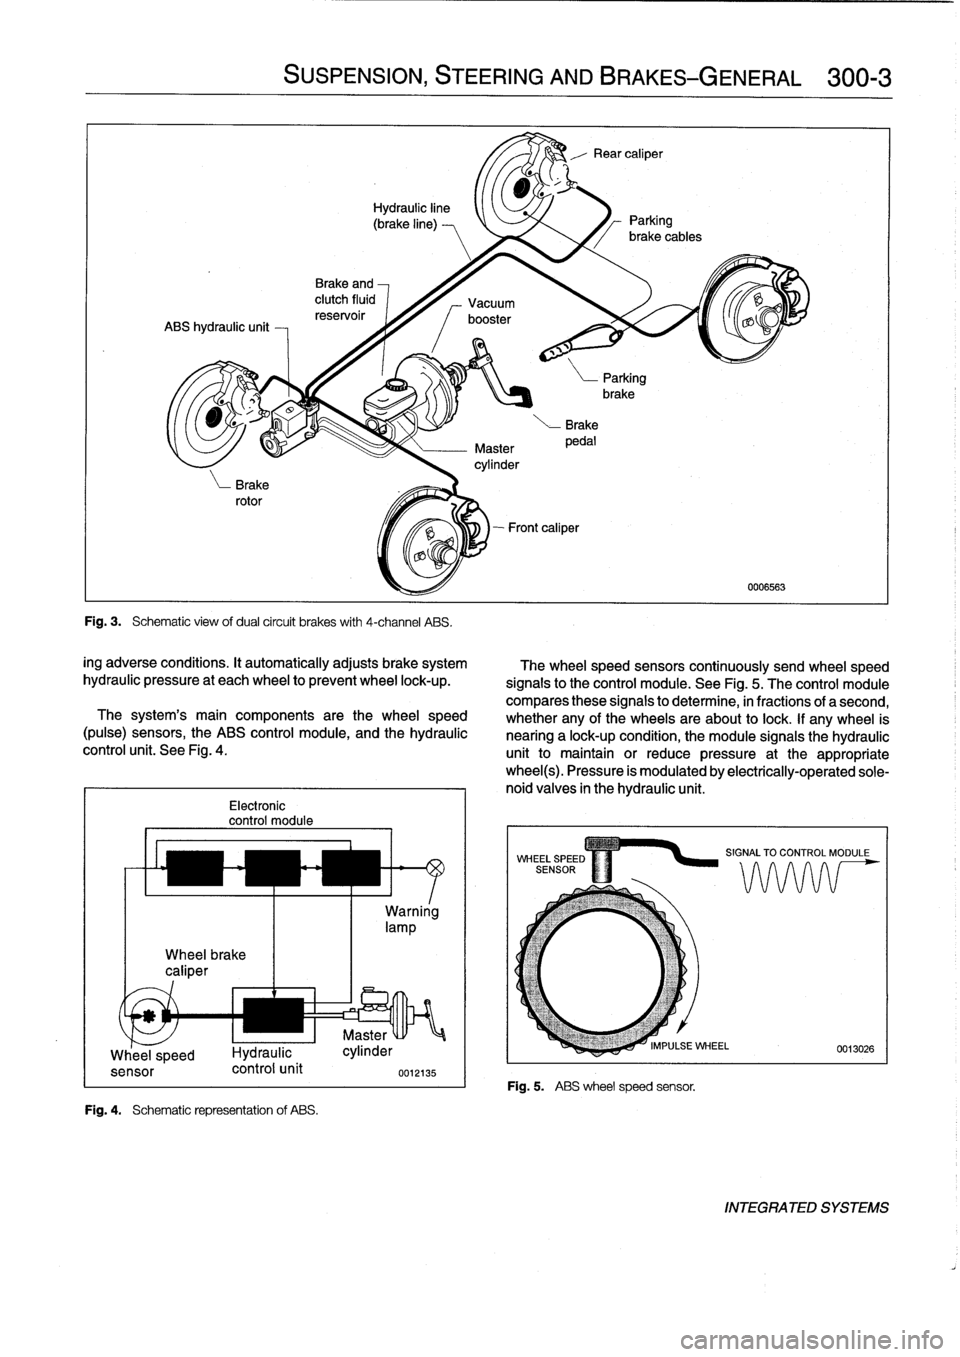 BMW 323i 1993 E36 Owners Manual 
Wheel
brake
caliper

Electronic
control
module
Fig
.
4
.

	

Schematic
representation
of
ABS
.

SUSPENSION,
STEERING
ANDBRAKES-GENERAL

	

300-3

Fig
.
3
.

	

Schematic
view
ofdual
circuit
brakes
wi